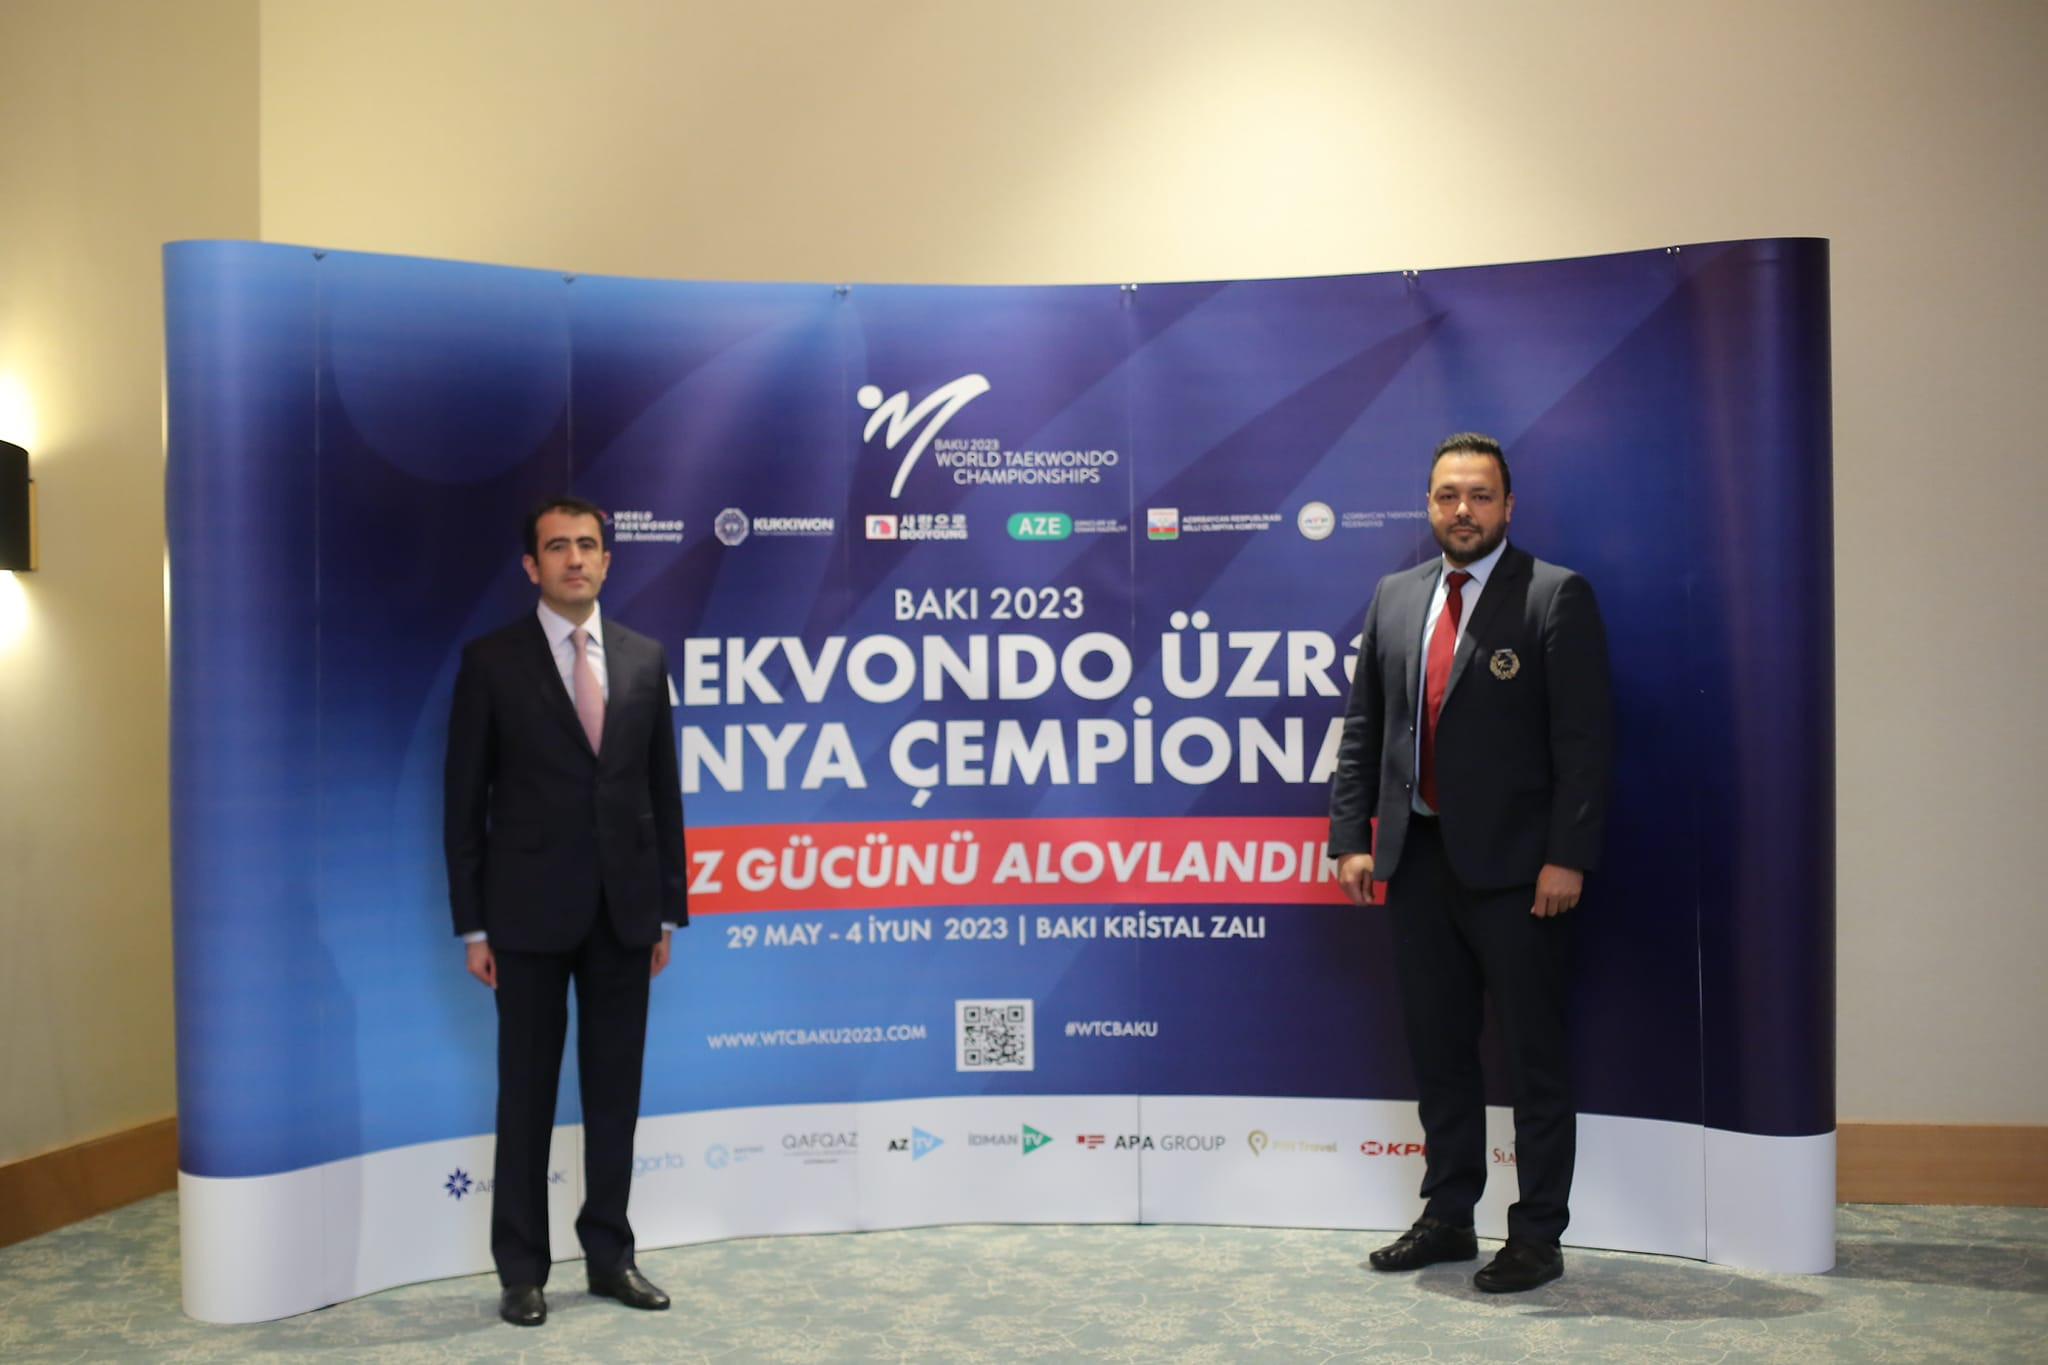 World Taekwondo's Mohamed Shabaan, right, has stated the upcoming World Taekwondo Championships have additional importance as they are the last before the Paris 2024 Olympic Games ©Azerbaijan Taekwondo Federation